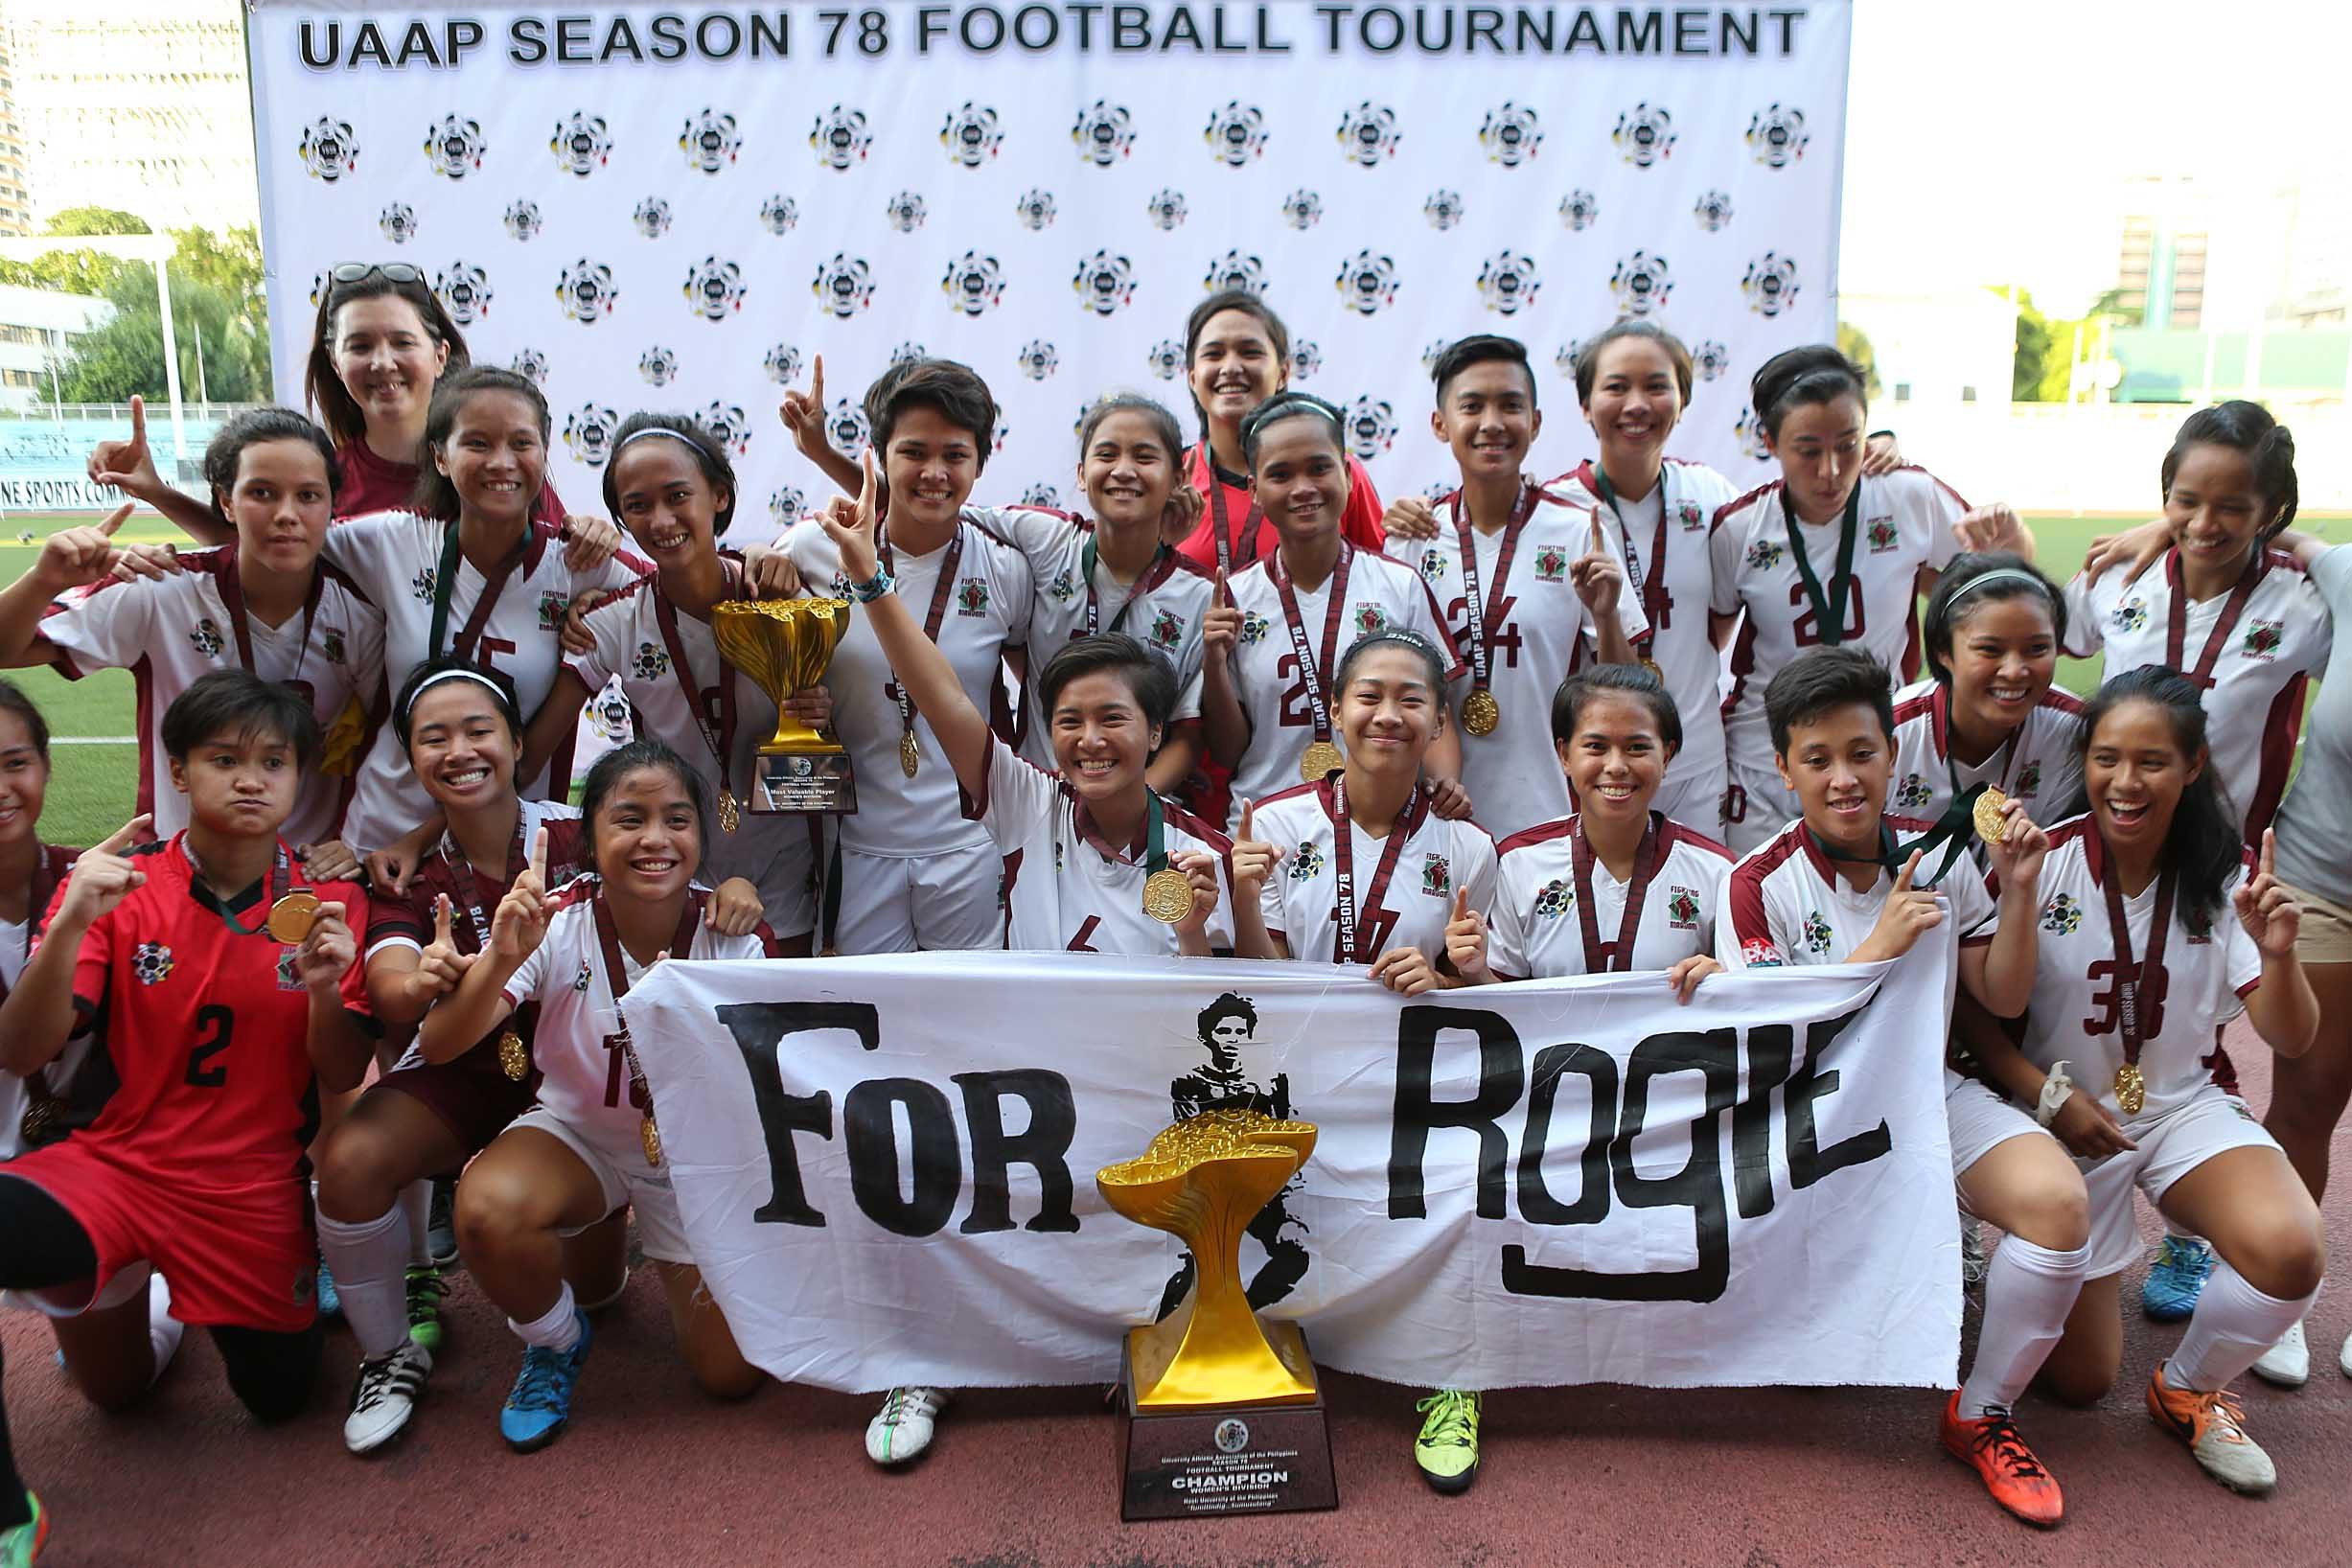 FOR ROGIE. The UP women's football team gives respect for Rogie Maglinas, the UP men's player who died earlier this year from cancer, after winning its first ever UAAP women's football title. File photo by Josh Albelda/ Rappler  